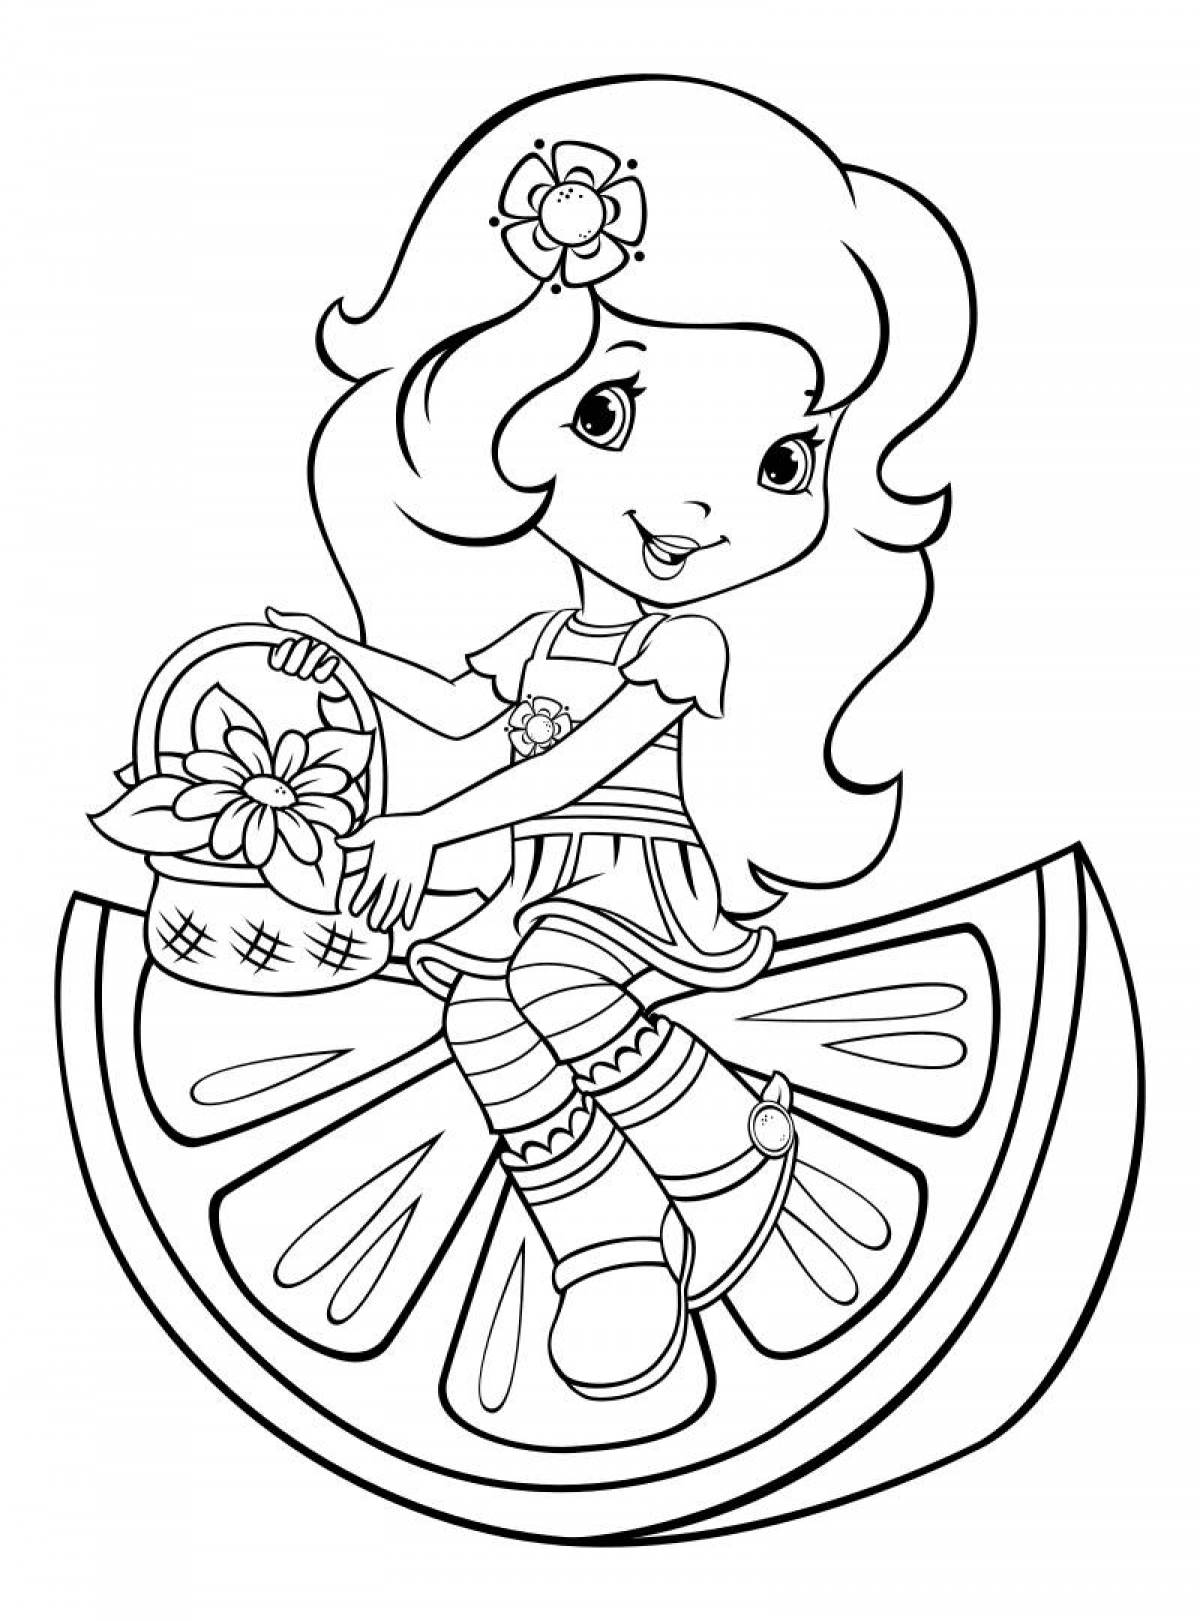 Glorious coloring book for girls 5-6 years old